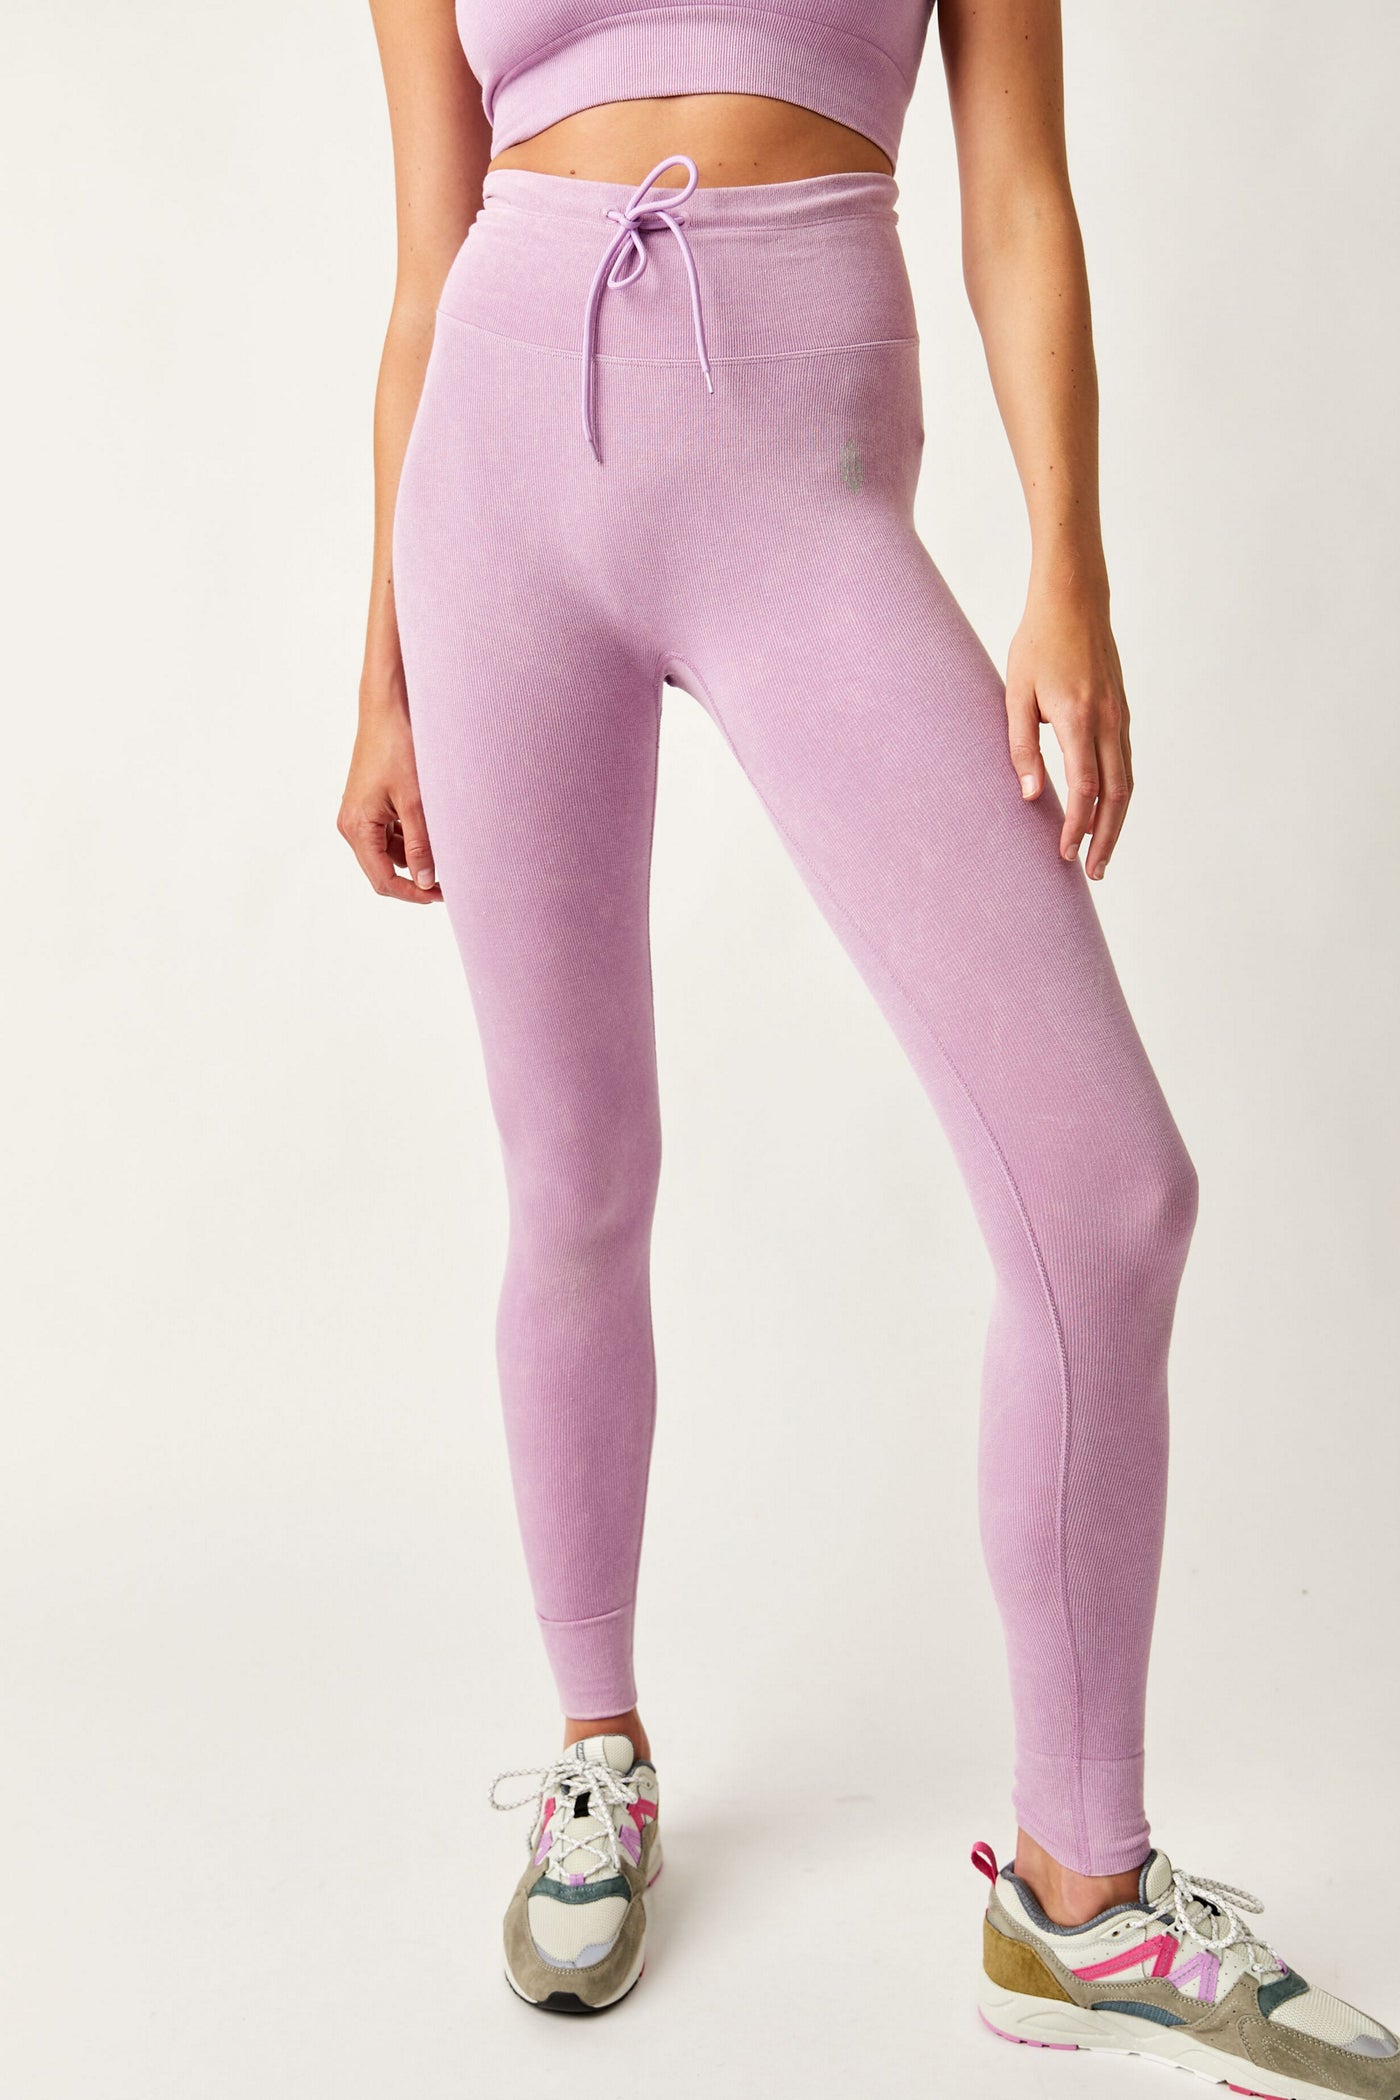 Free People Movement Pink Happiness Runs Leggings  Trendy bottoms, Leggings  are not pants, Athletic outfits